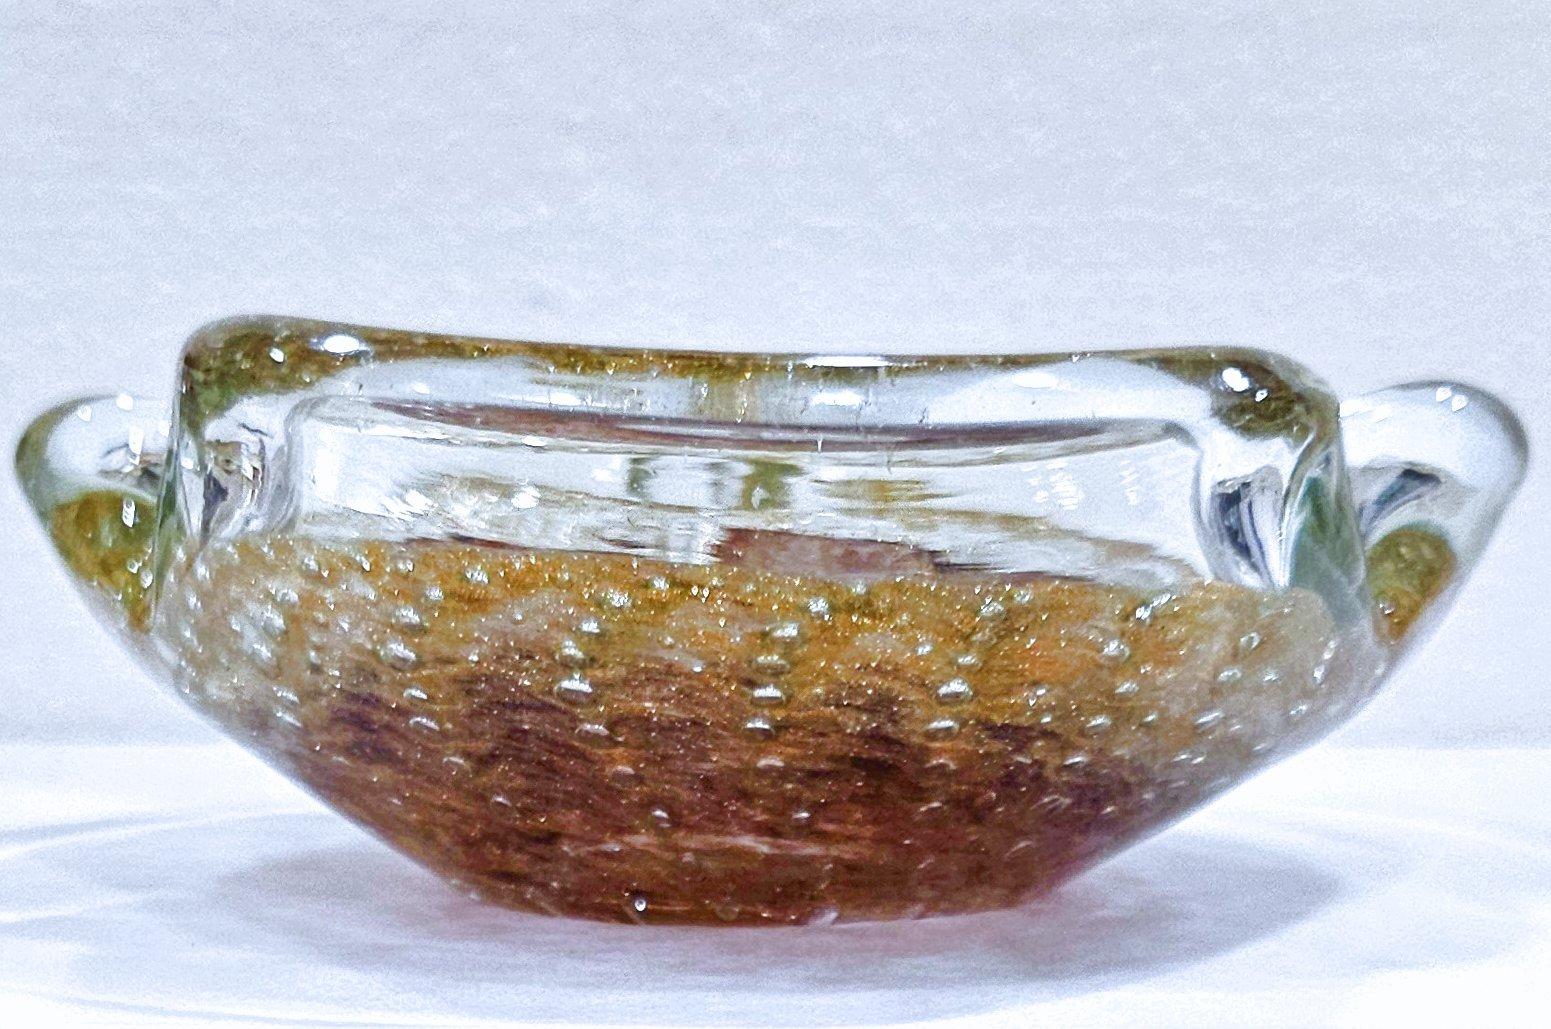 Vintage Murano Glass Ashtray/Dish, Bullicante (controlled bubbles) & Aventurine
If you like shimmer, you'll love this piece with its generous aventurine, inside which is a nice, subtle pattern of controlled bubbles.
Measures: approximately 7 x 2 